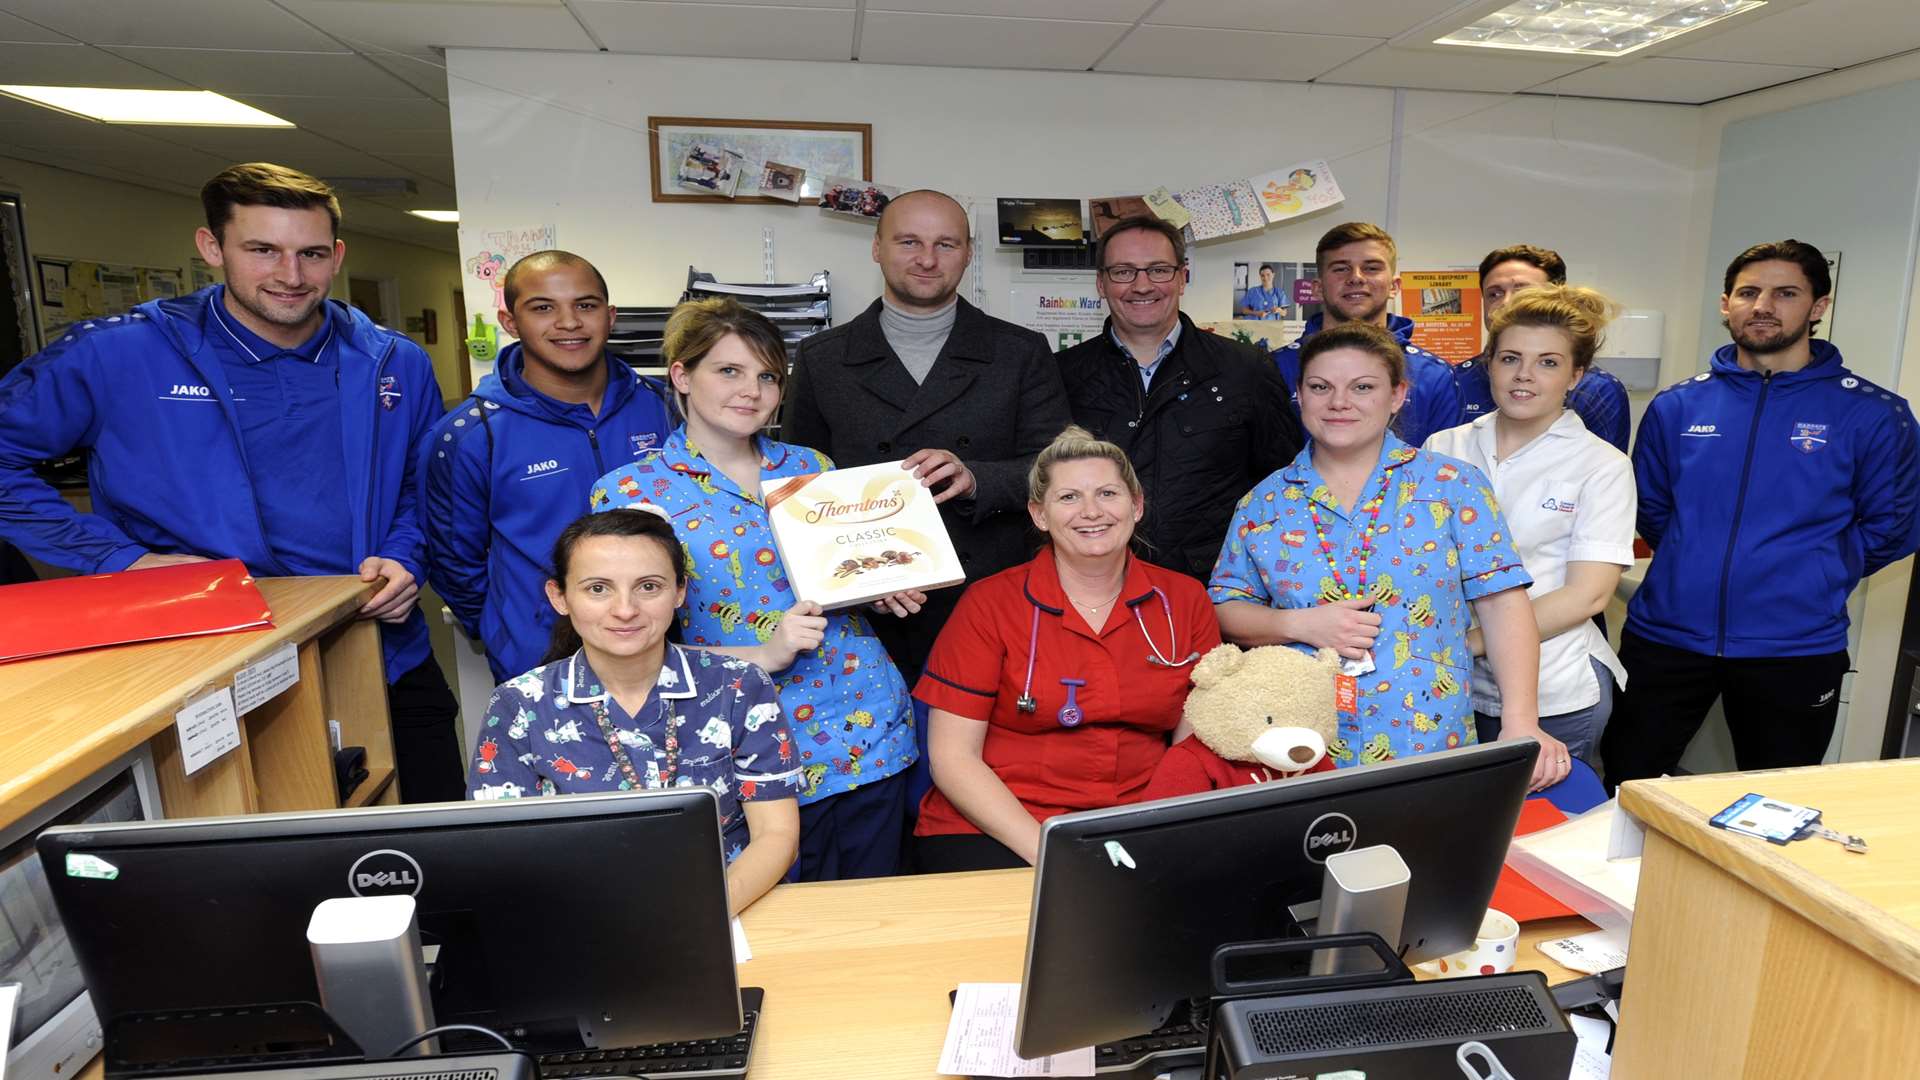 Margate FC spent time with patients and staff